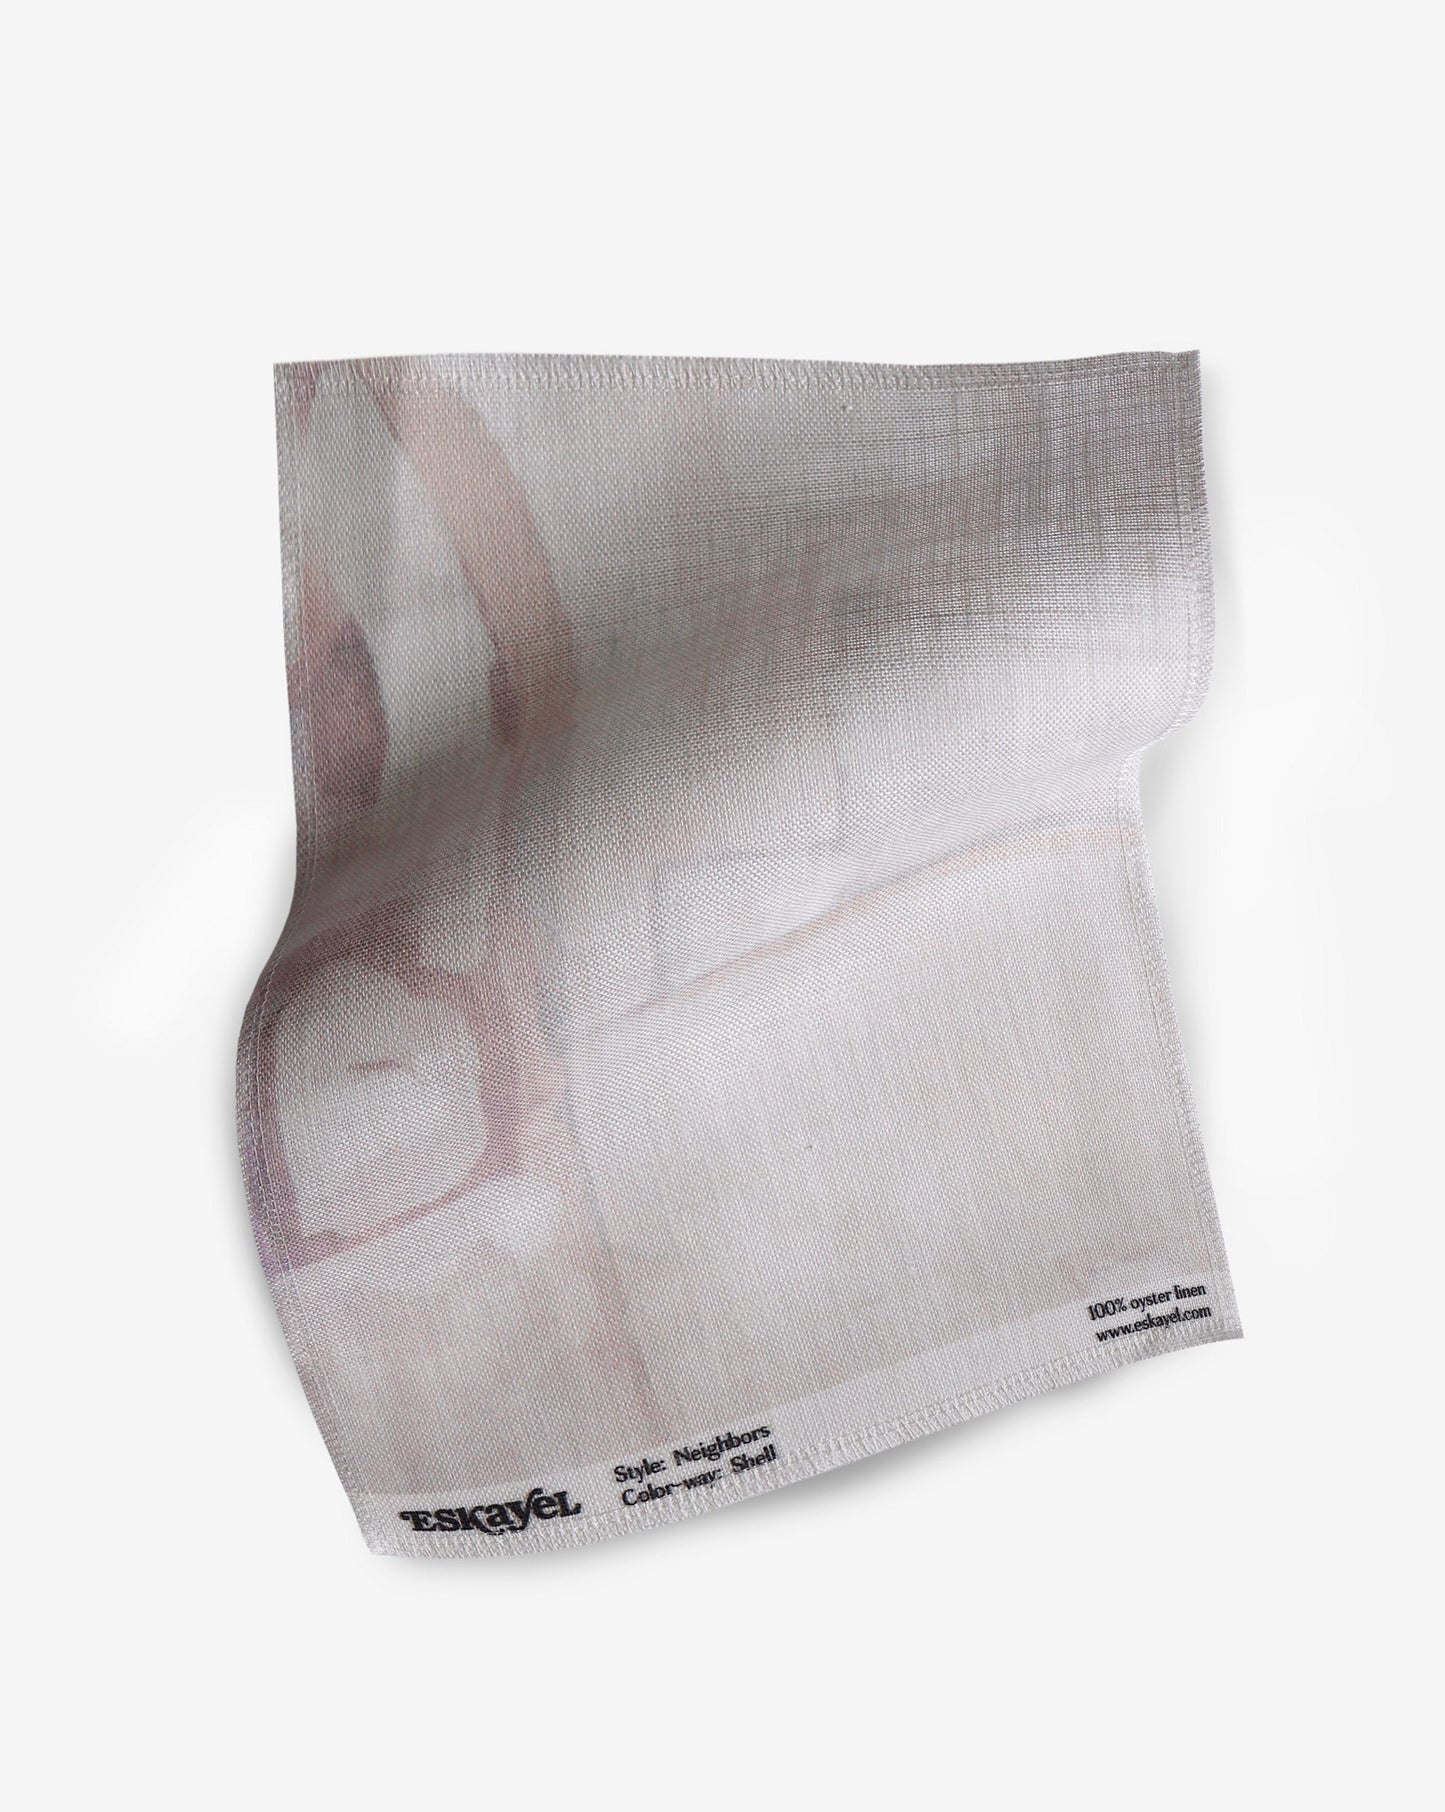 A fabric with our neighbors pattern featuring a design of abstract shapes in pink and white.